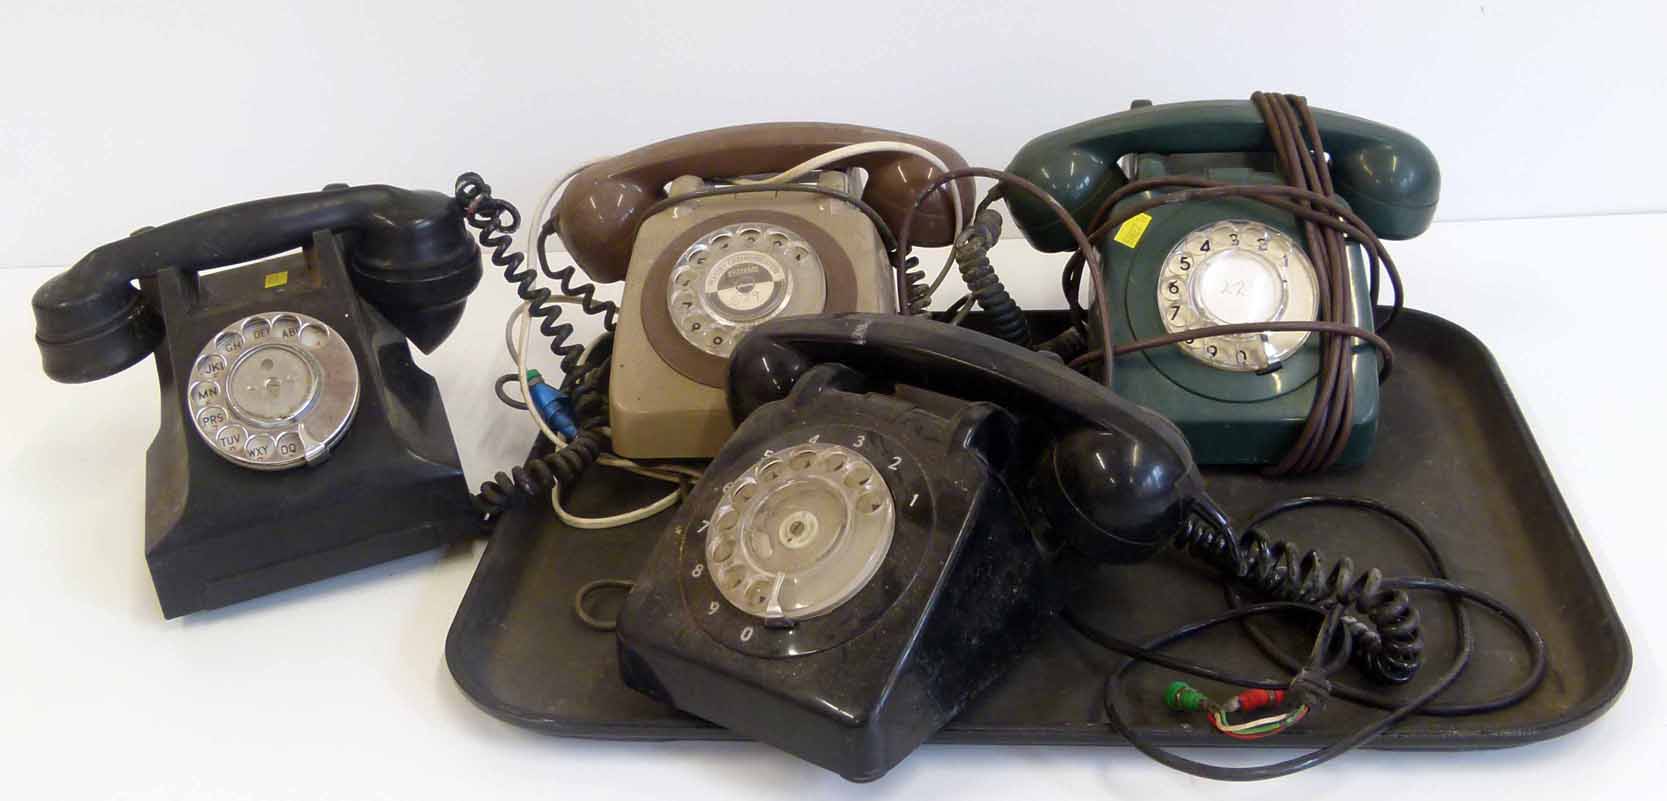 1950's Bakalite telephone (332L - EWR 64/2) and three 1970's telephones. Condition report: see terms